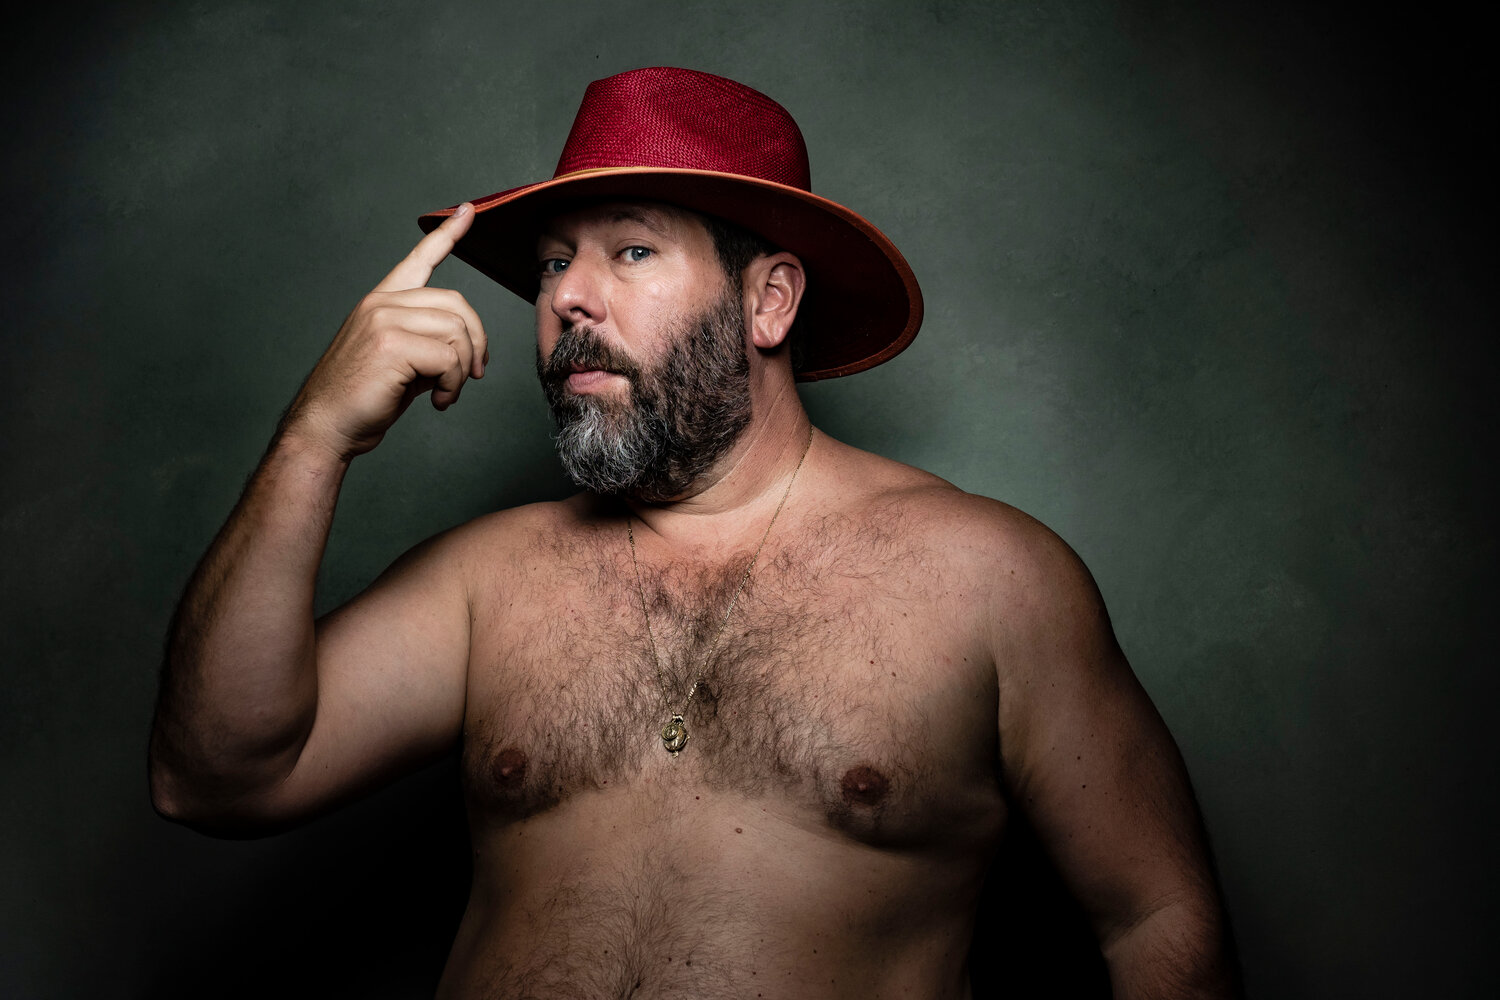 Bert Kreischer’s Fully Loaded Comedy Festival will take over The Wharf Amphitheater June 30. Tickets go on sale Friday, March 8 at 10 a.m.